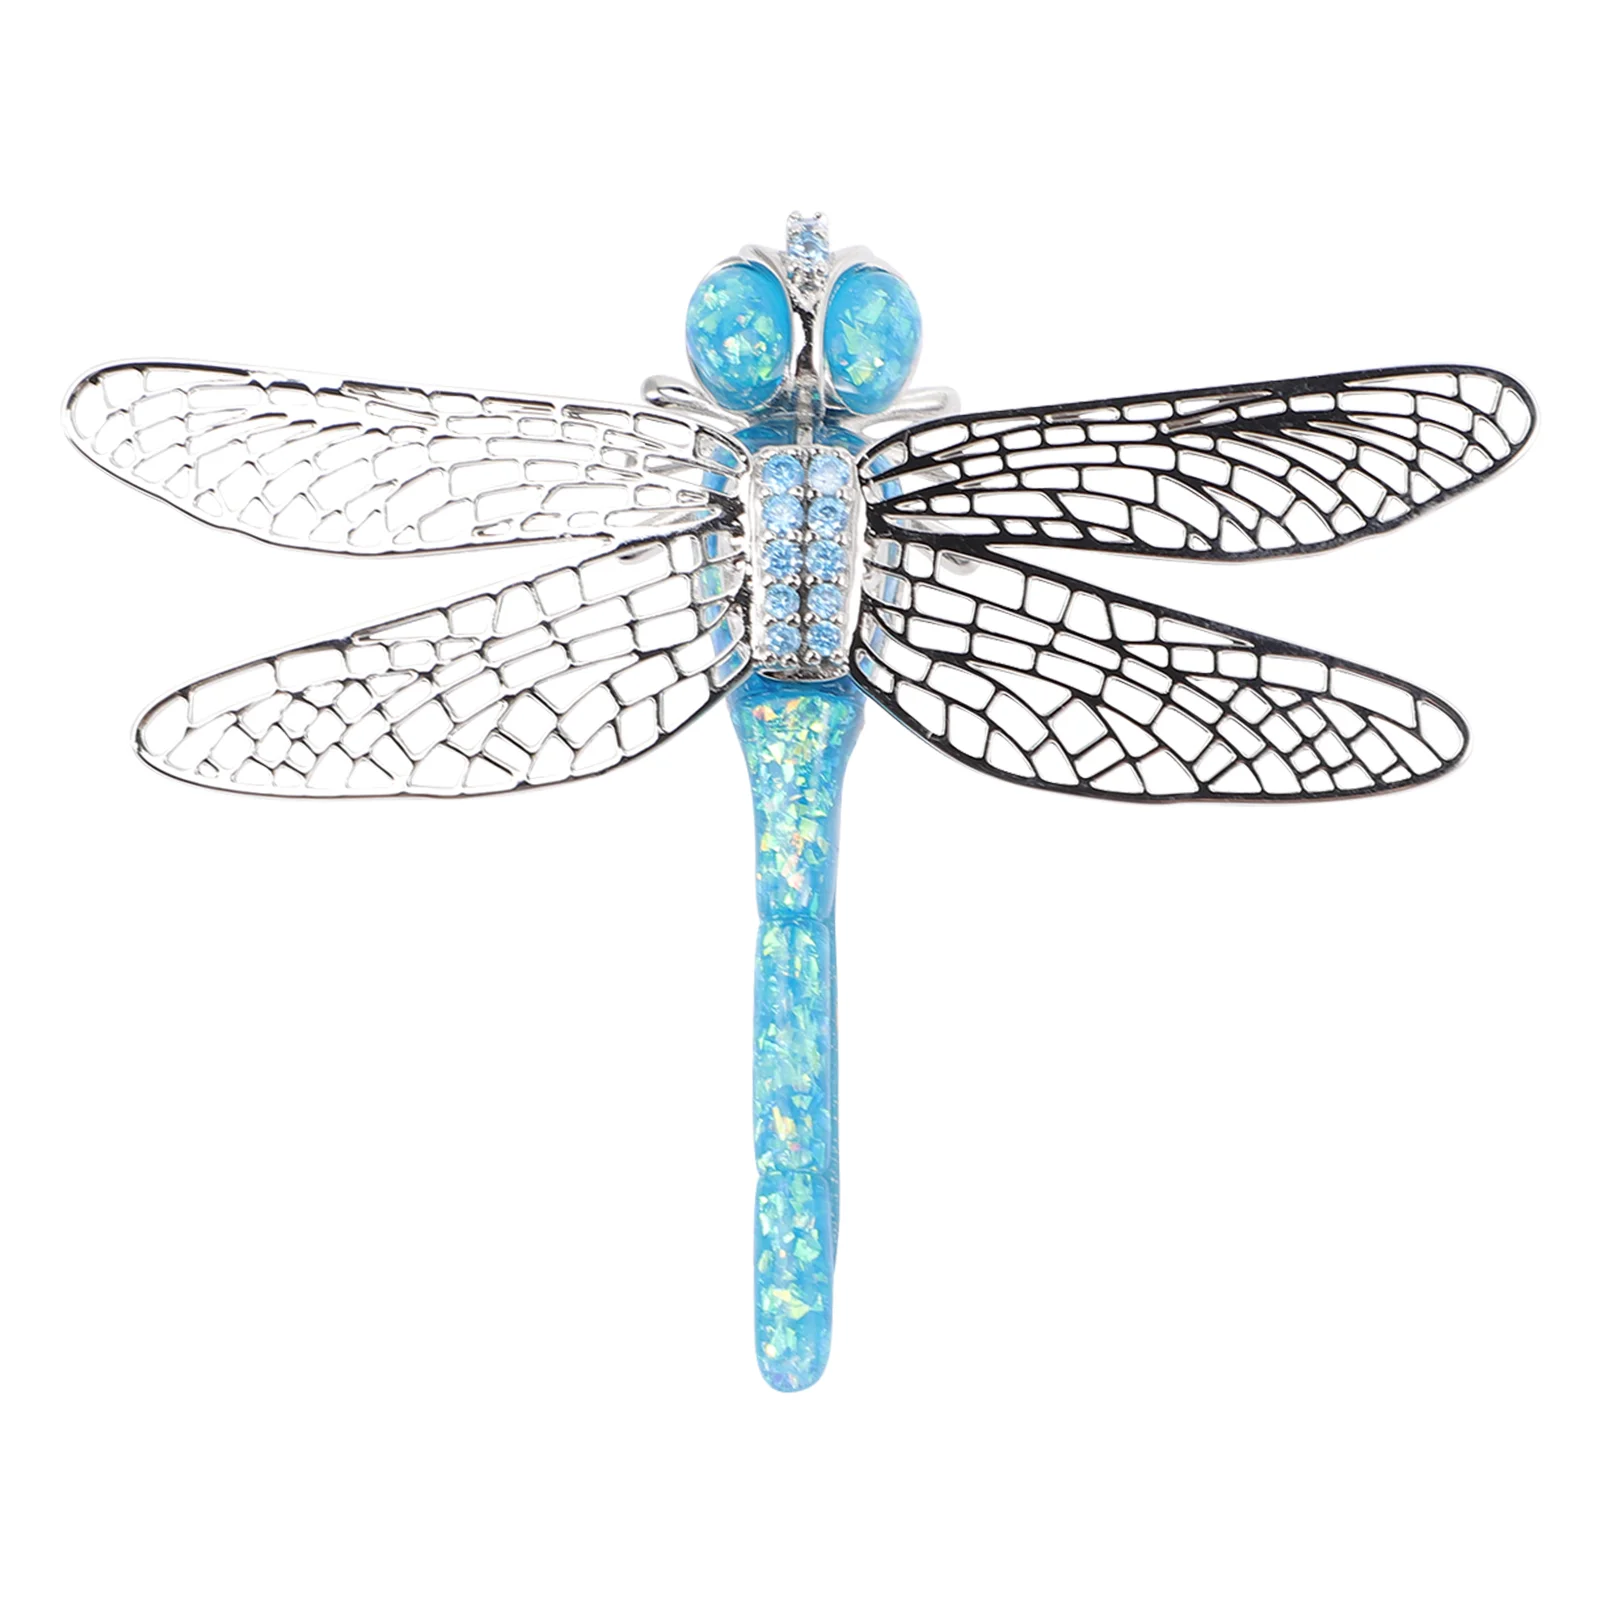 

Dragonfly Brooch Accesorios Para Mujer Collar Pin Women Accessories Suit Prom Jewelry Imitation Opal Fashion Miss Lapel